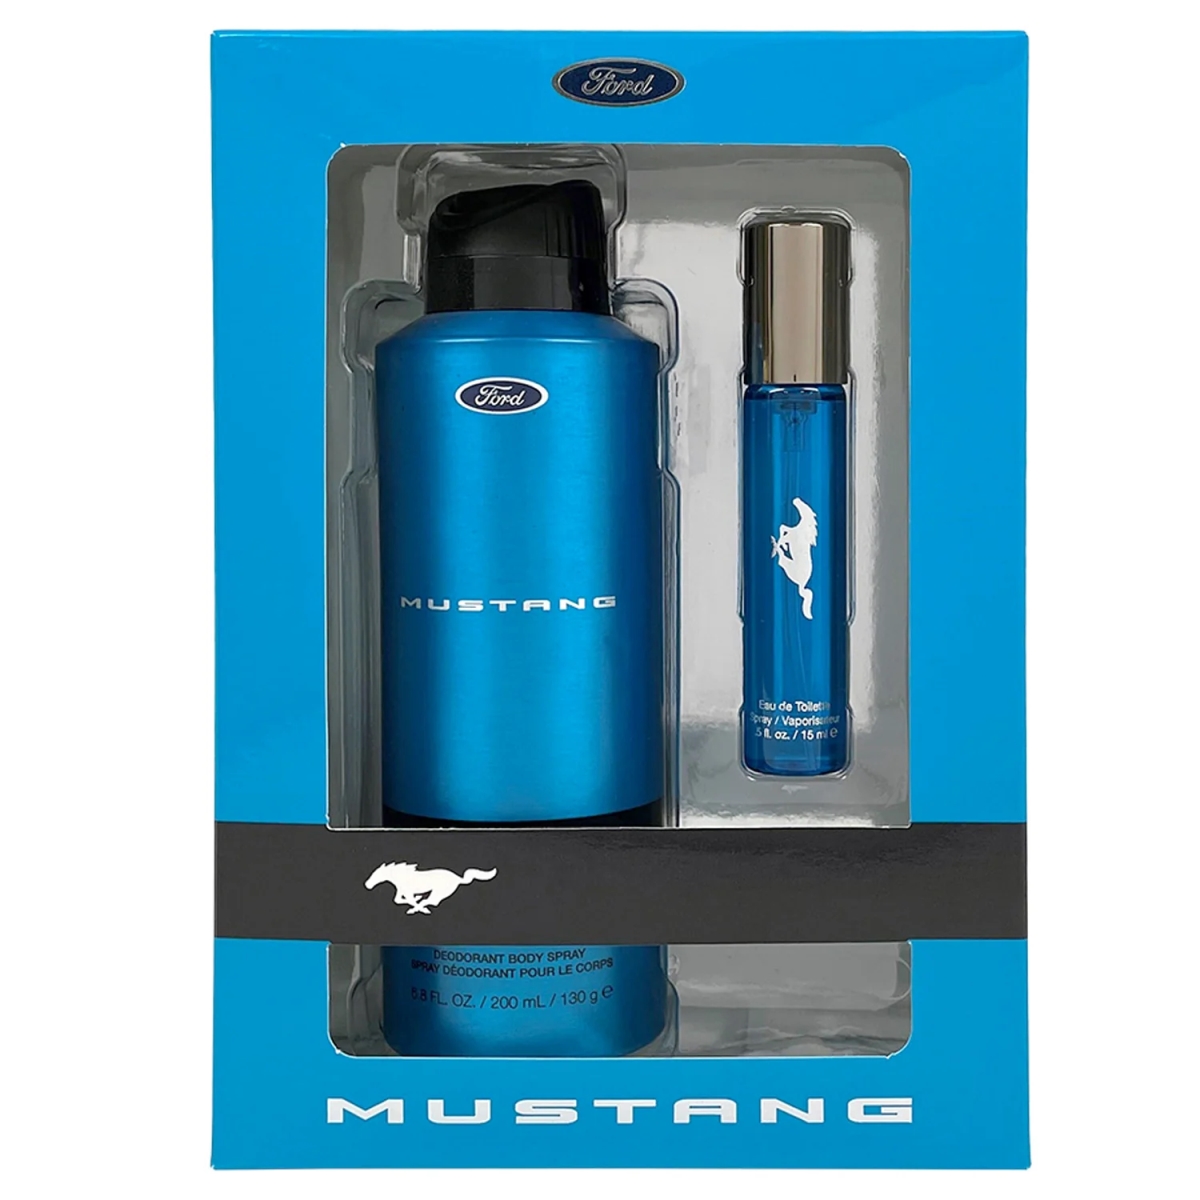 Picture of Mustang 22030079 Blue Mens Gift Set - 2 Piece